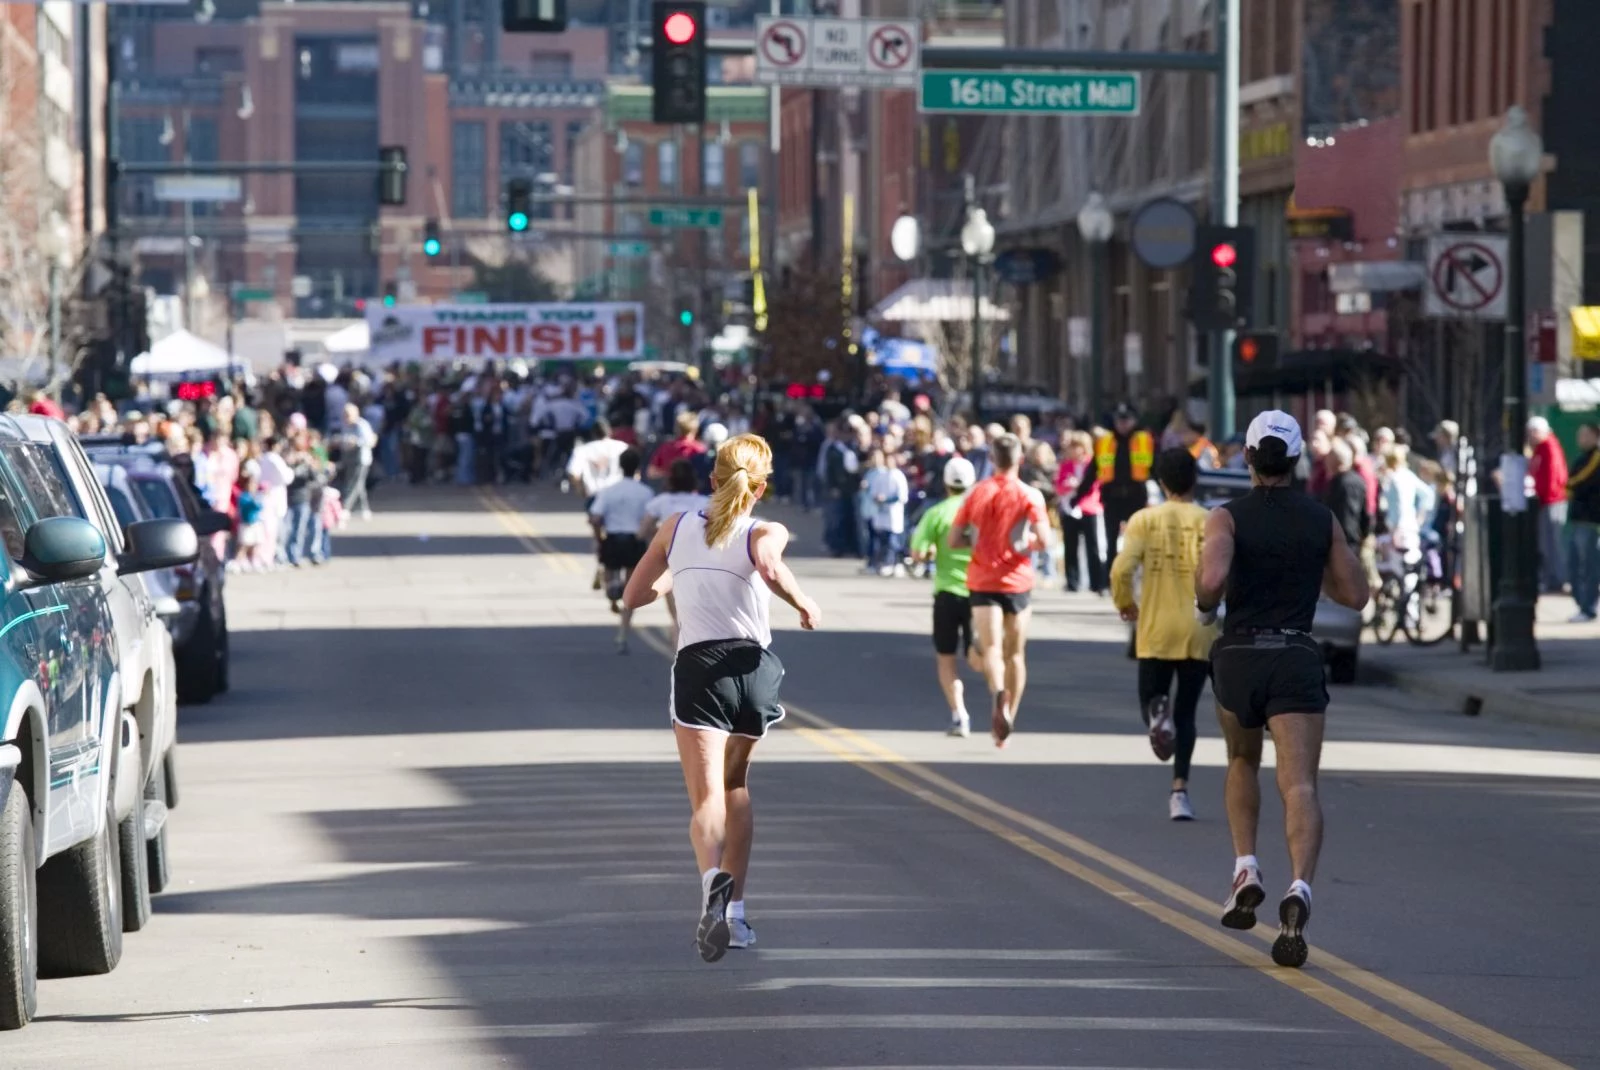 Downtown Council Partners With CentraCare for Earth Day Run